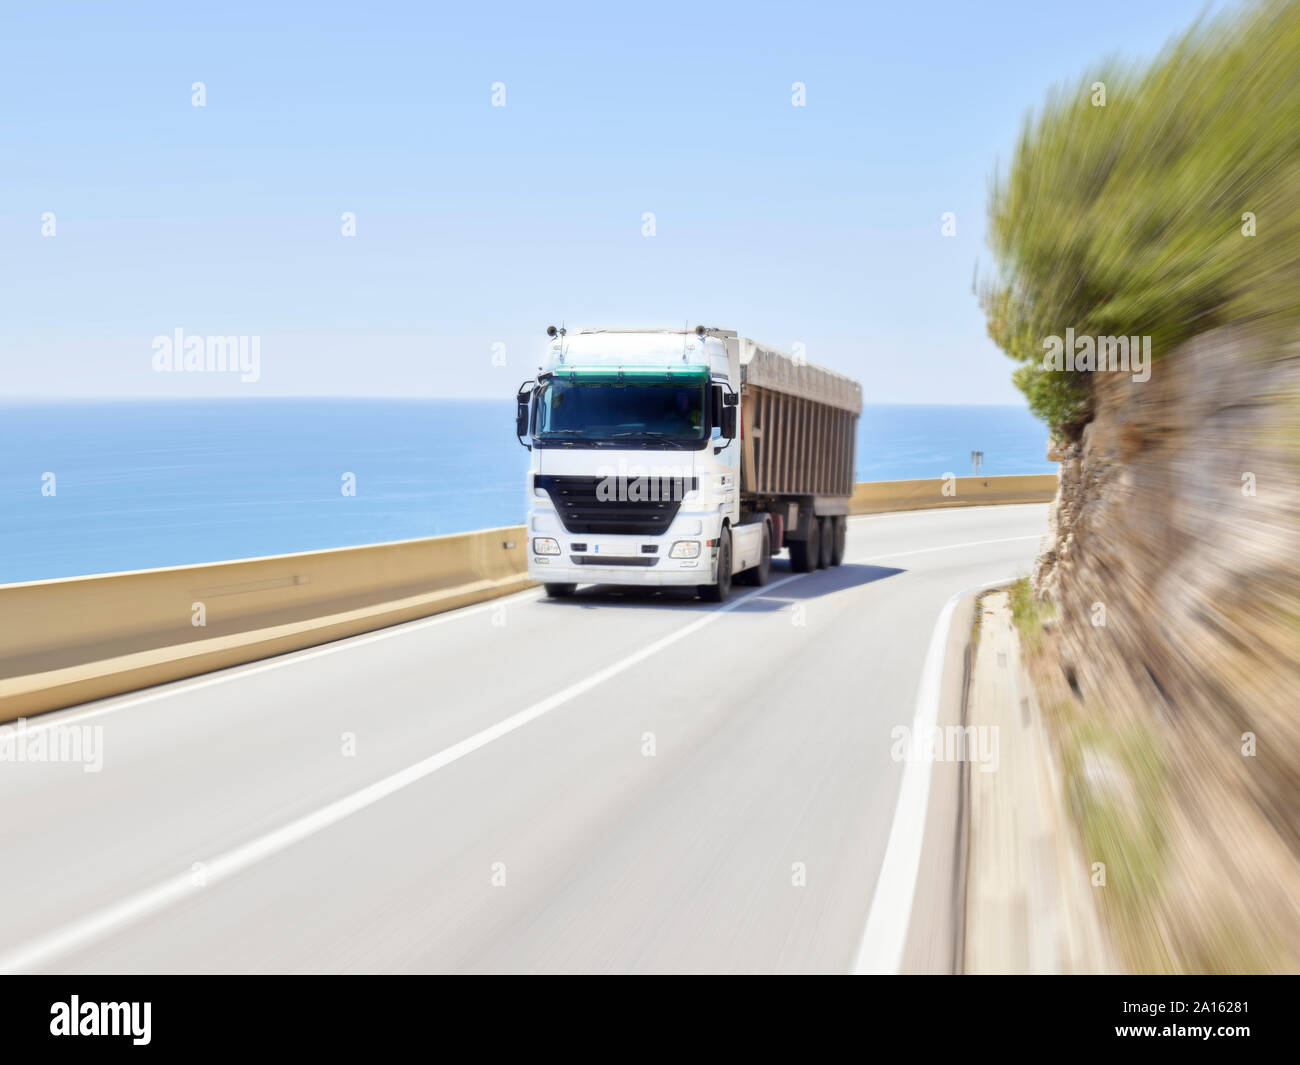 Truck driving along Jersey barrier of coastal highway, Sitges, Barcelona, Spain Stock Photo